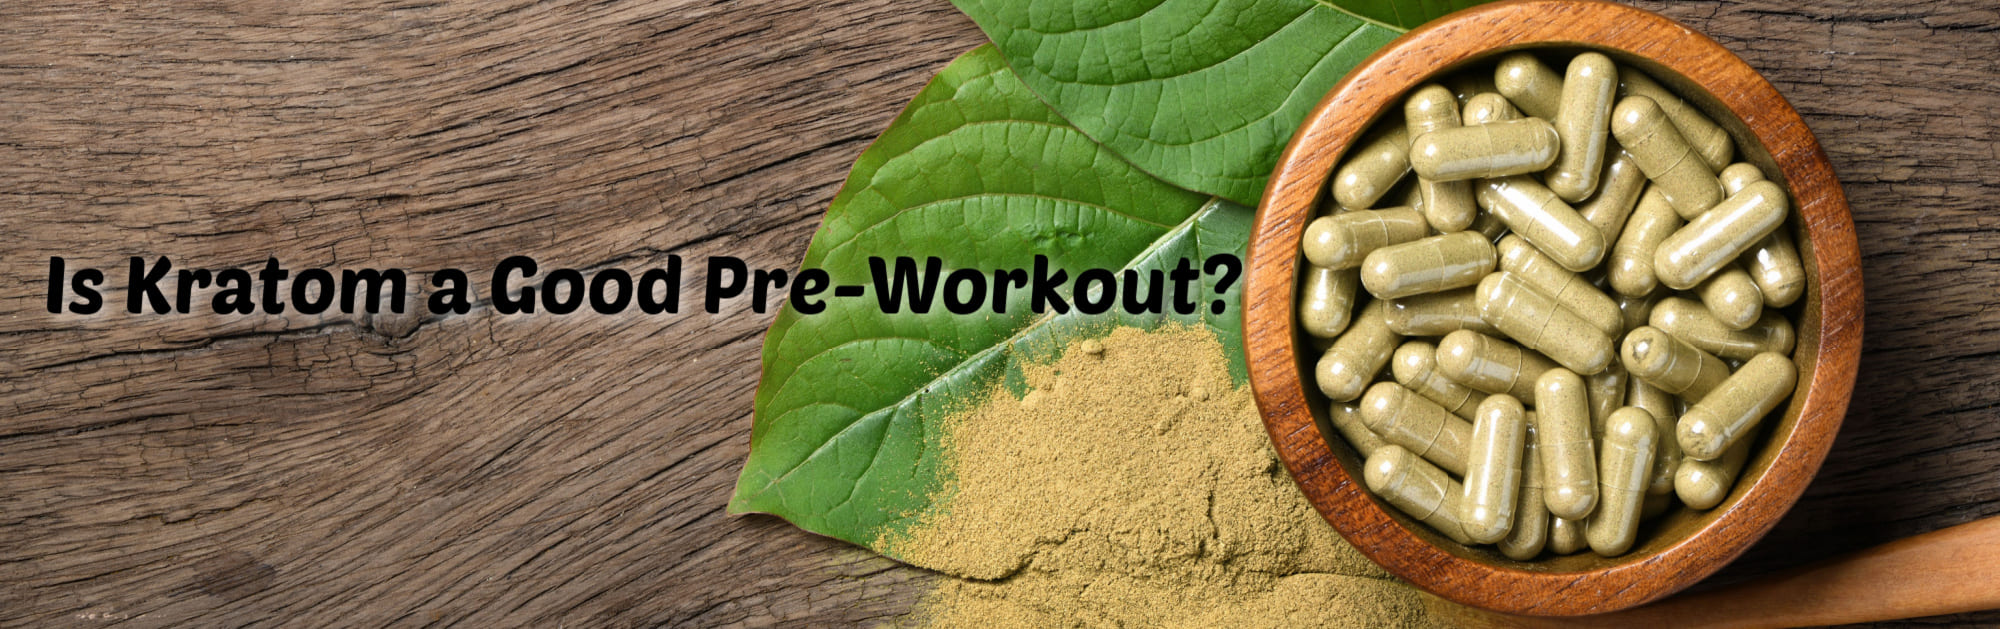 Kratom as Pre-Workout: Potential Benefits for Exercise